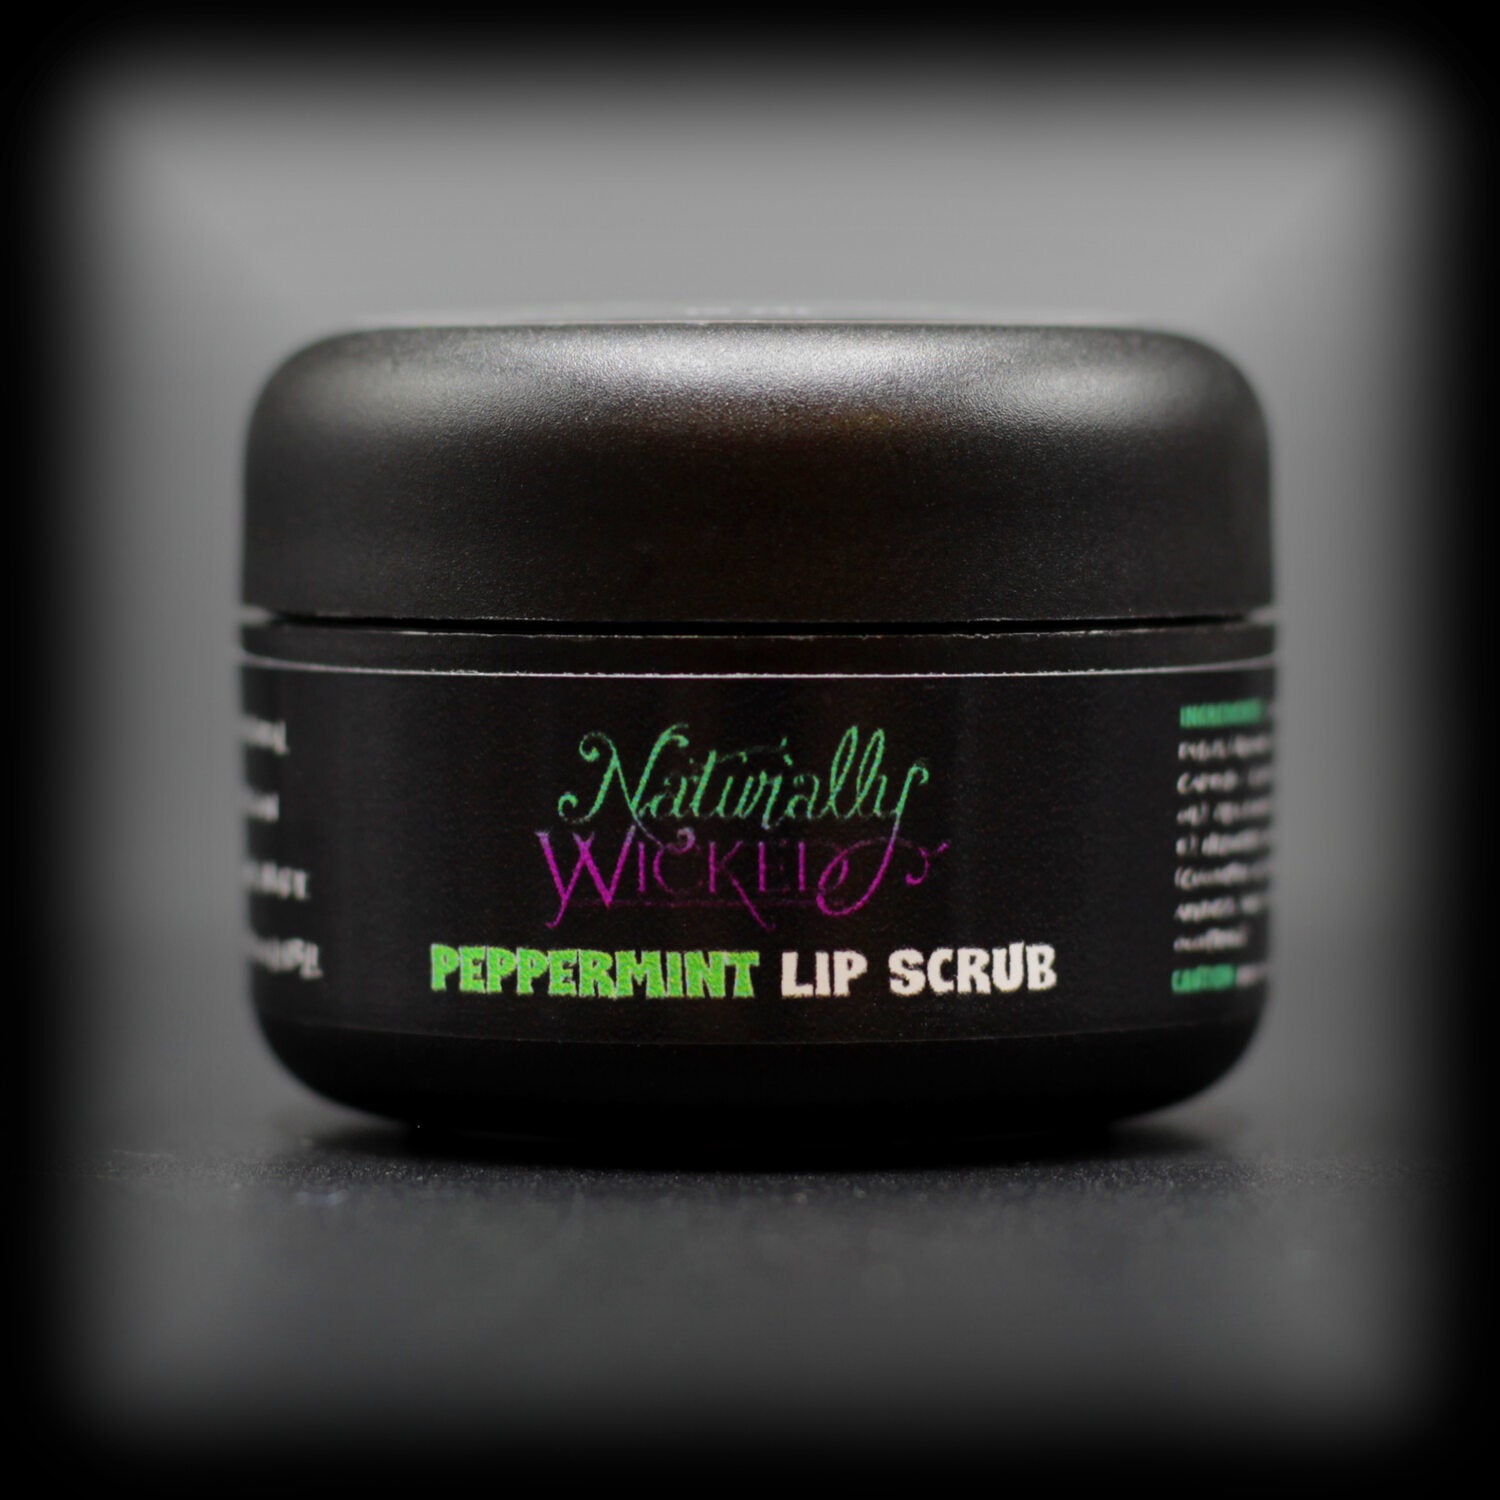 Naturally Wicked Peppermint Lip Scrub In Luxury Black Container On Dark Background